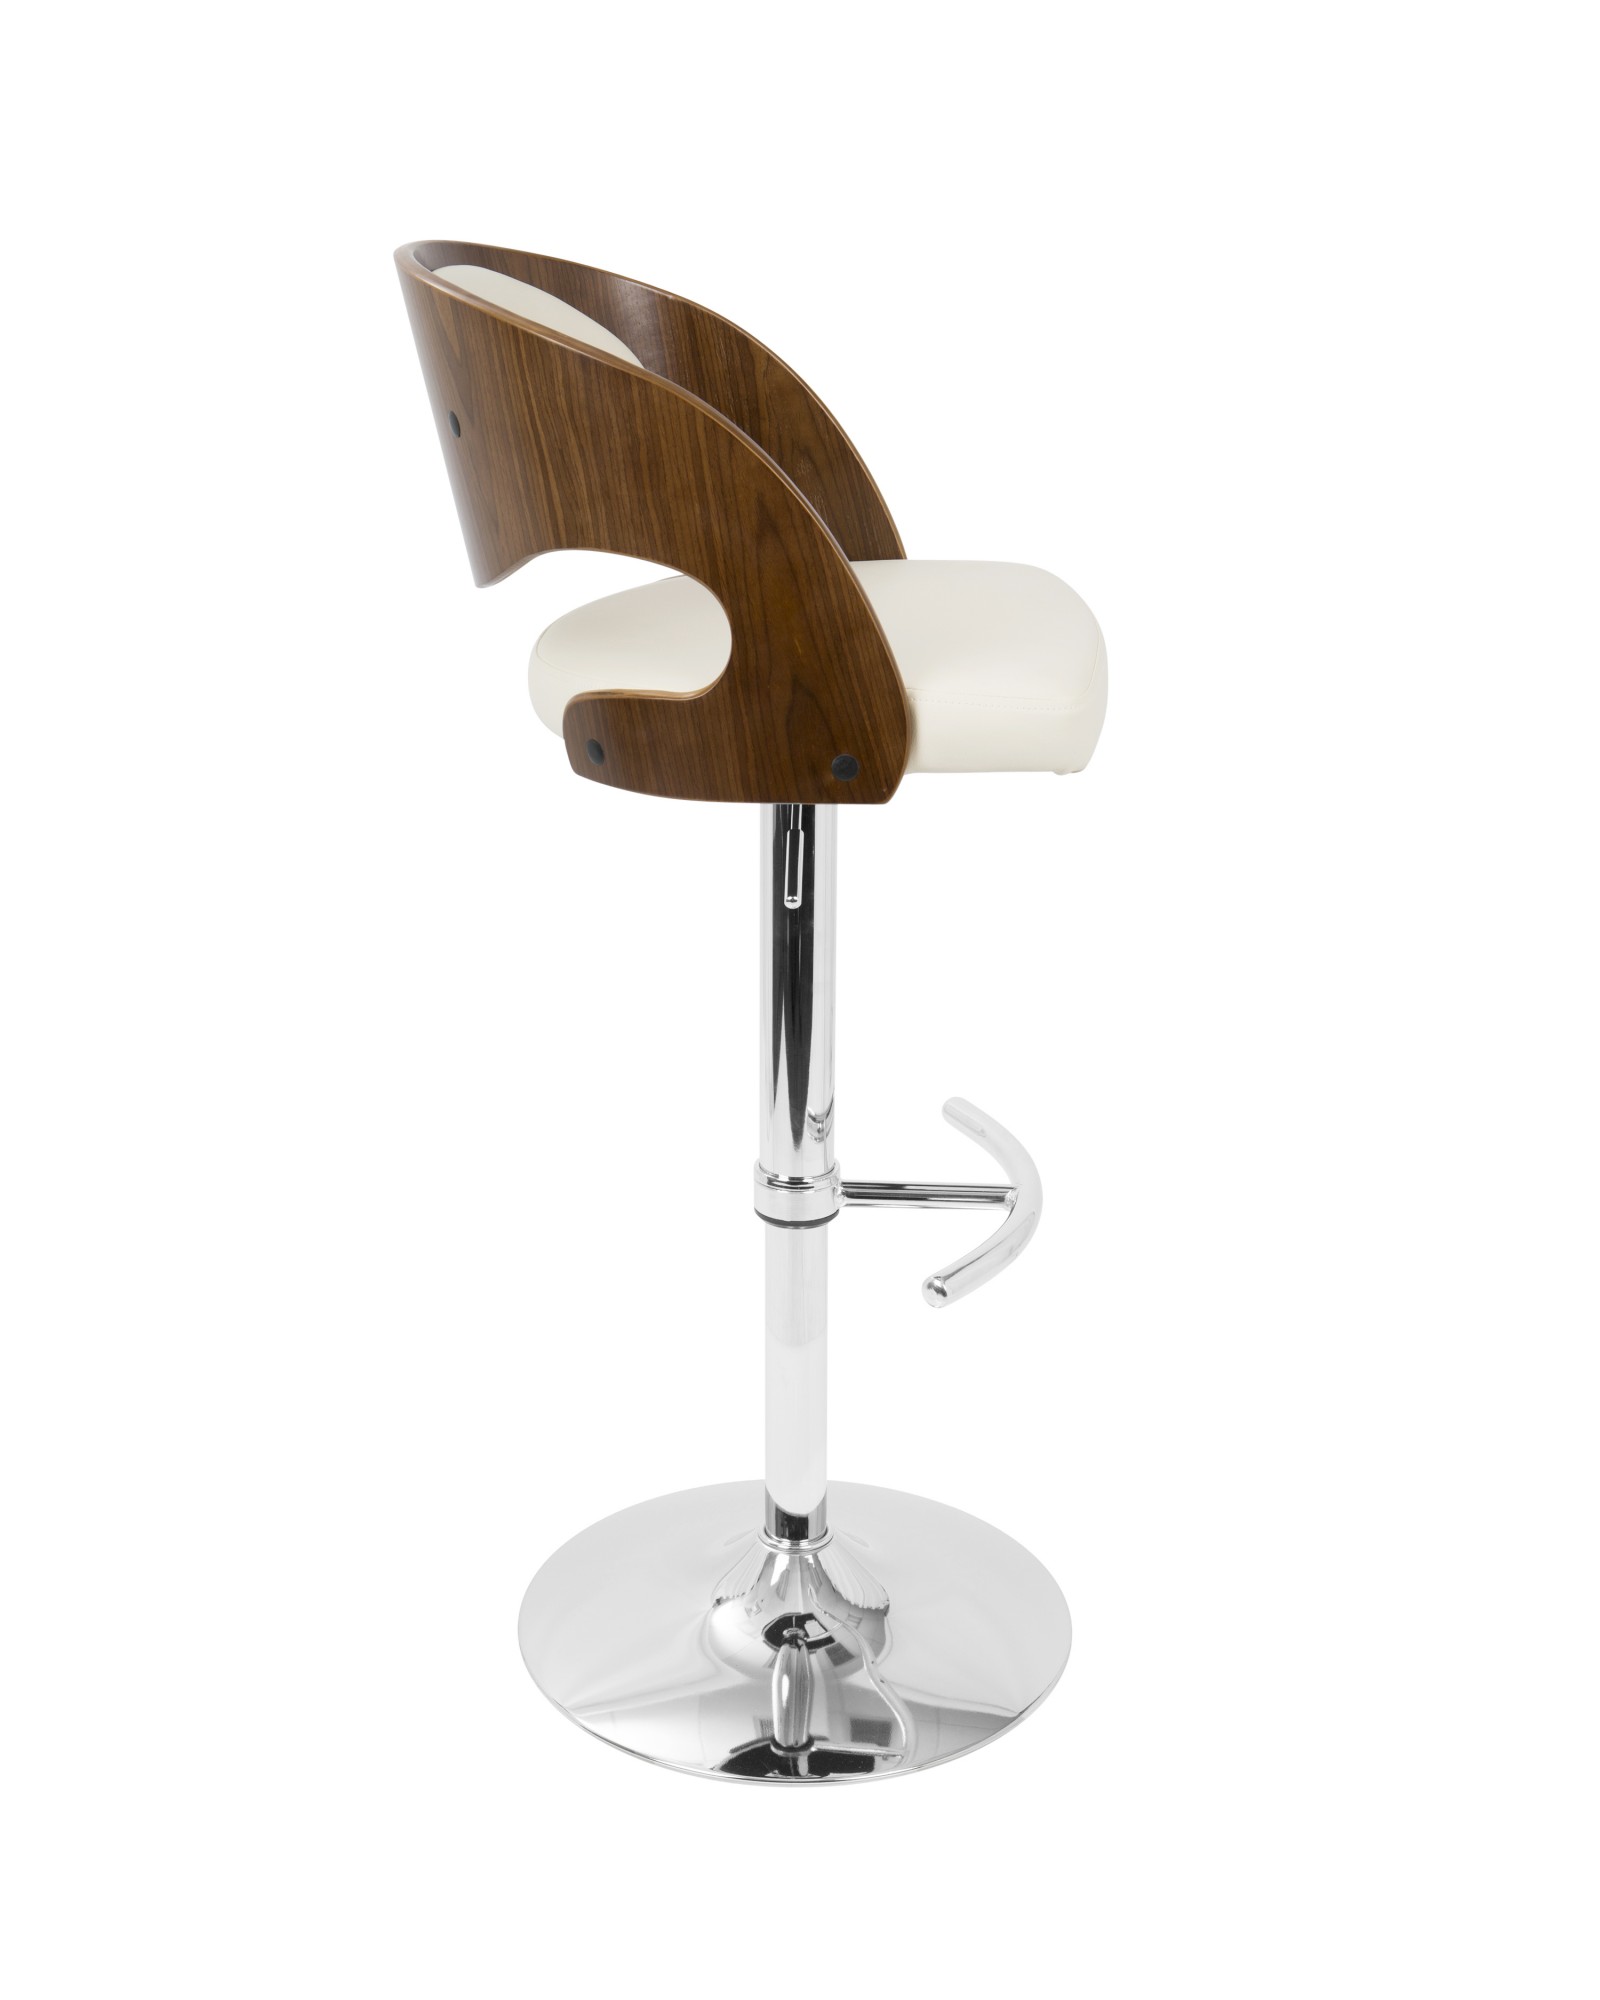 Pino Mid-Century Modern Adjustable Barstool with Swivel in Walnut and Cream Faux Leather